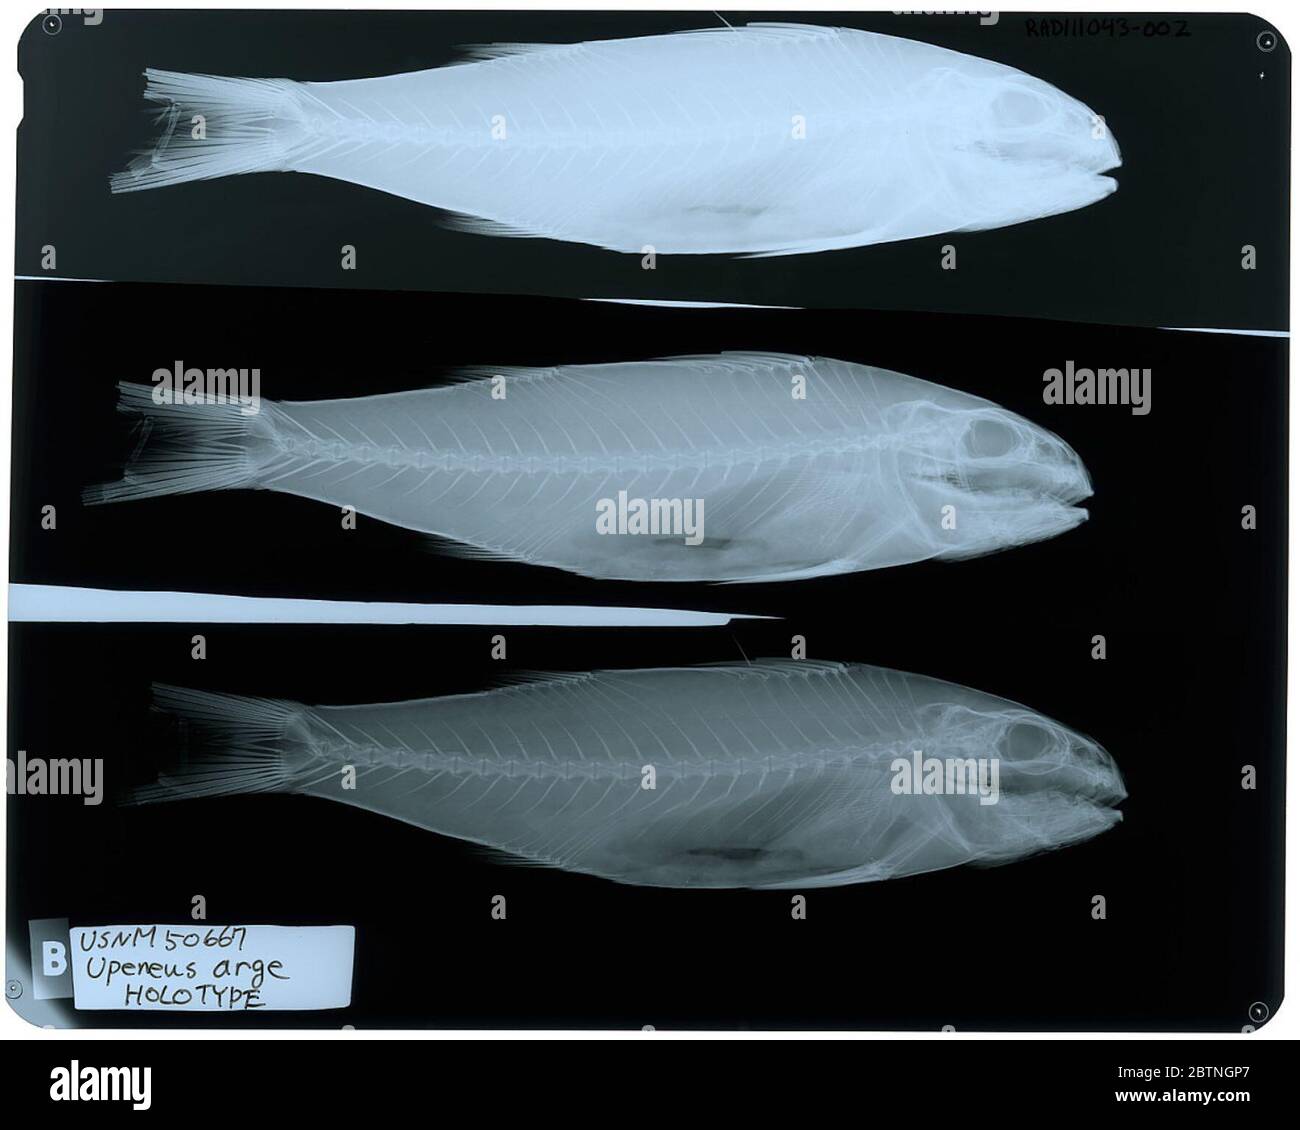 Upeneus arge. Radiograph is of a holotype; The Smithsonian NMNH Division of Fishes uses the convention of maintaining the original species name for type specimens designated at the time of description. The currently accepted name for this species is Upeneus taeniopterus.26 Oct 20182 Stock Photo